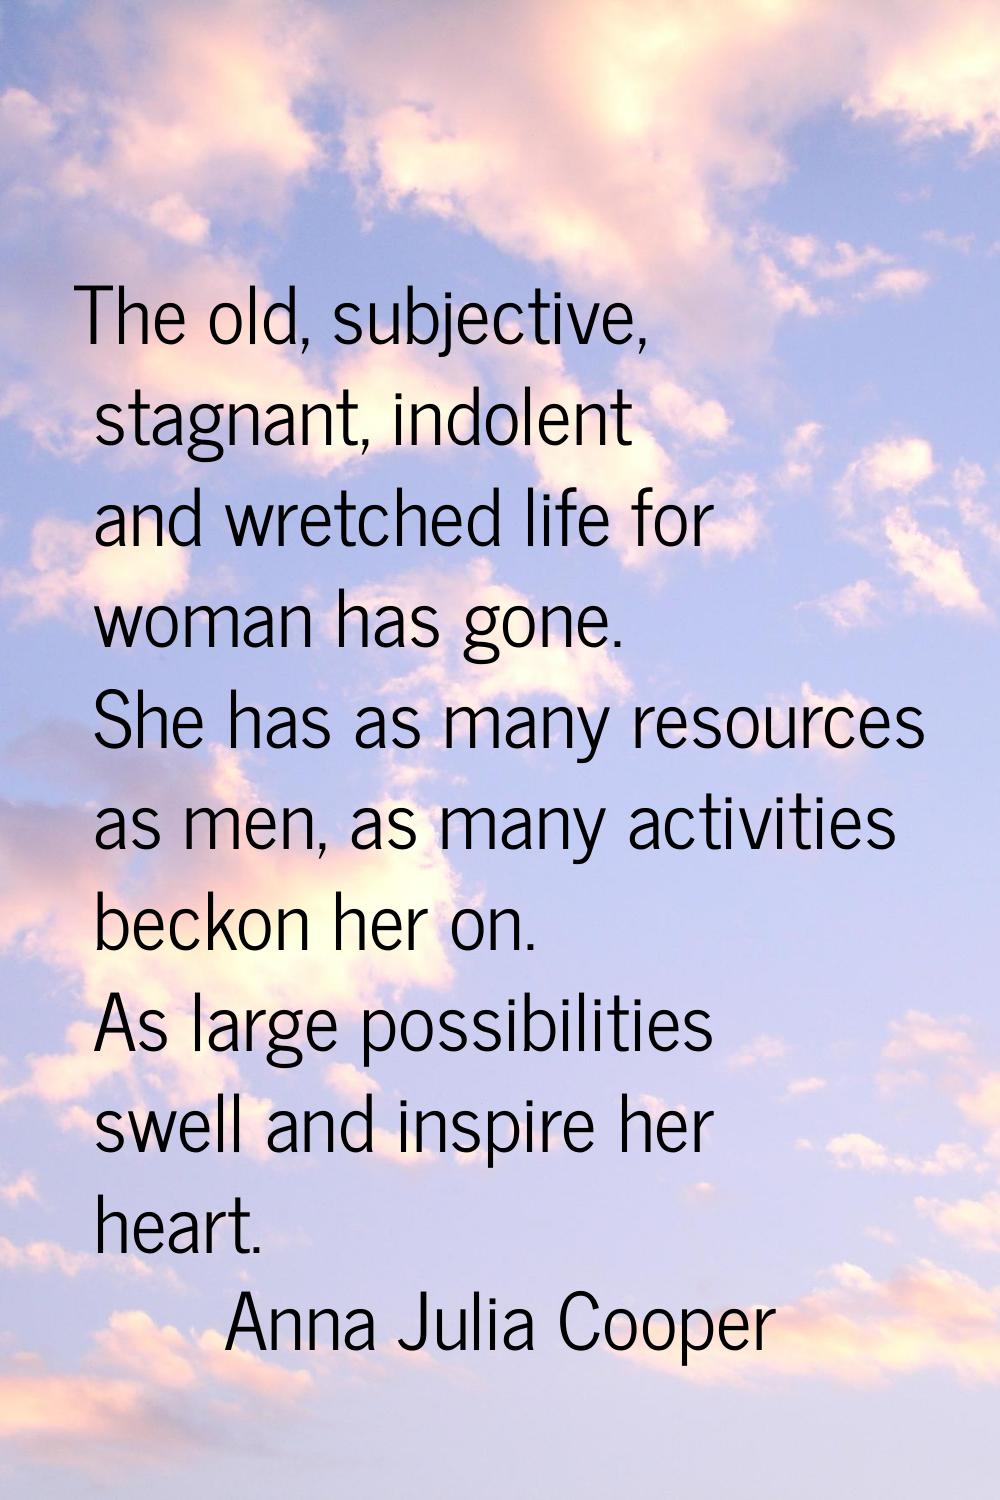 The old, subjective, stagnant, indolent and wretched life for woman has gone. She has as many resou